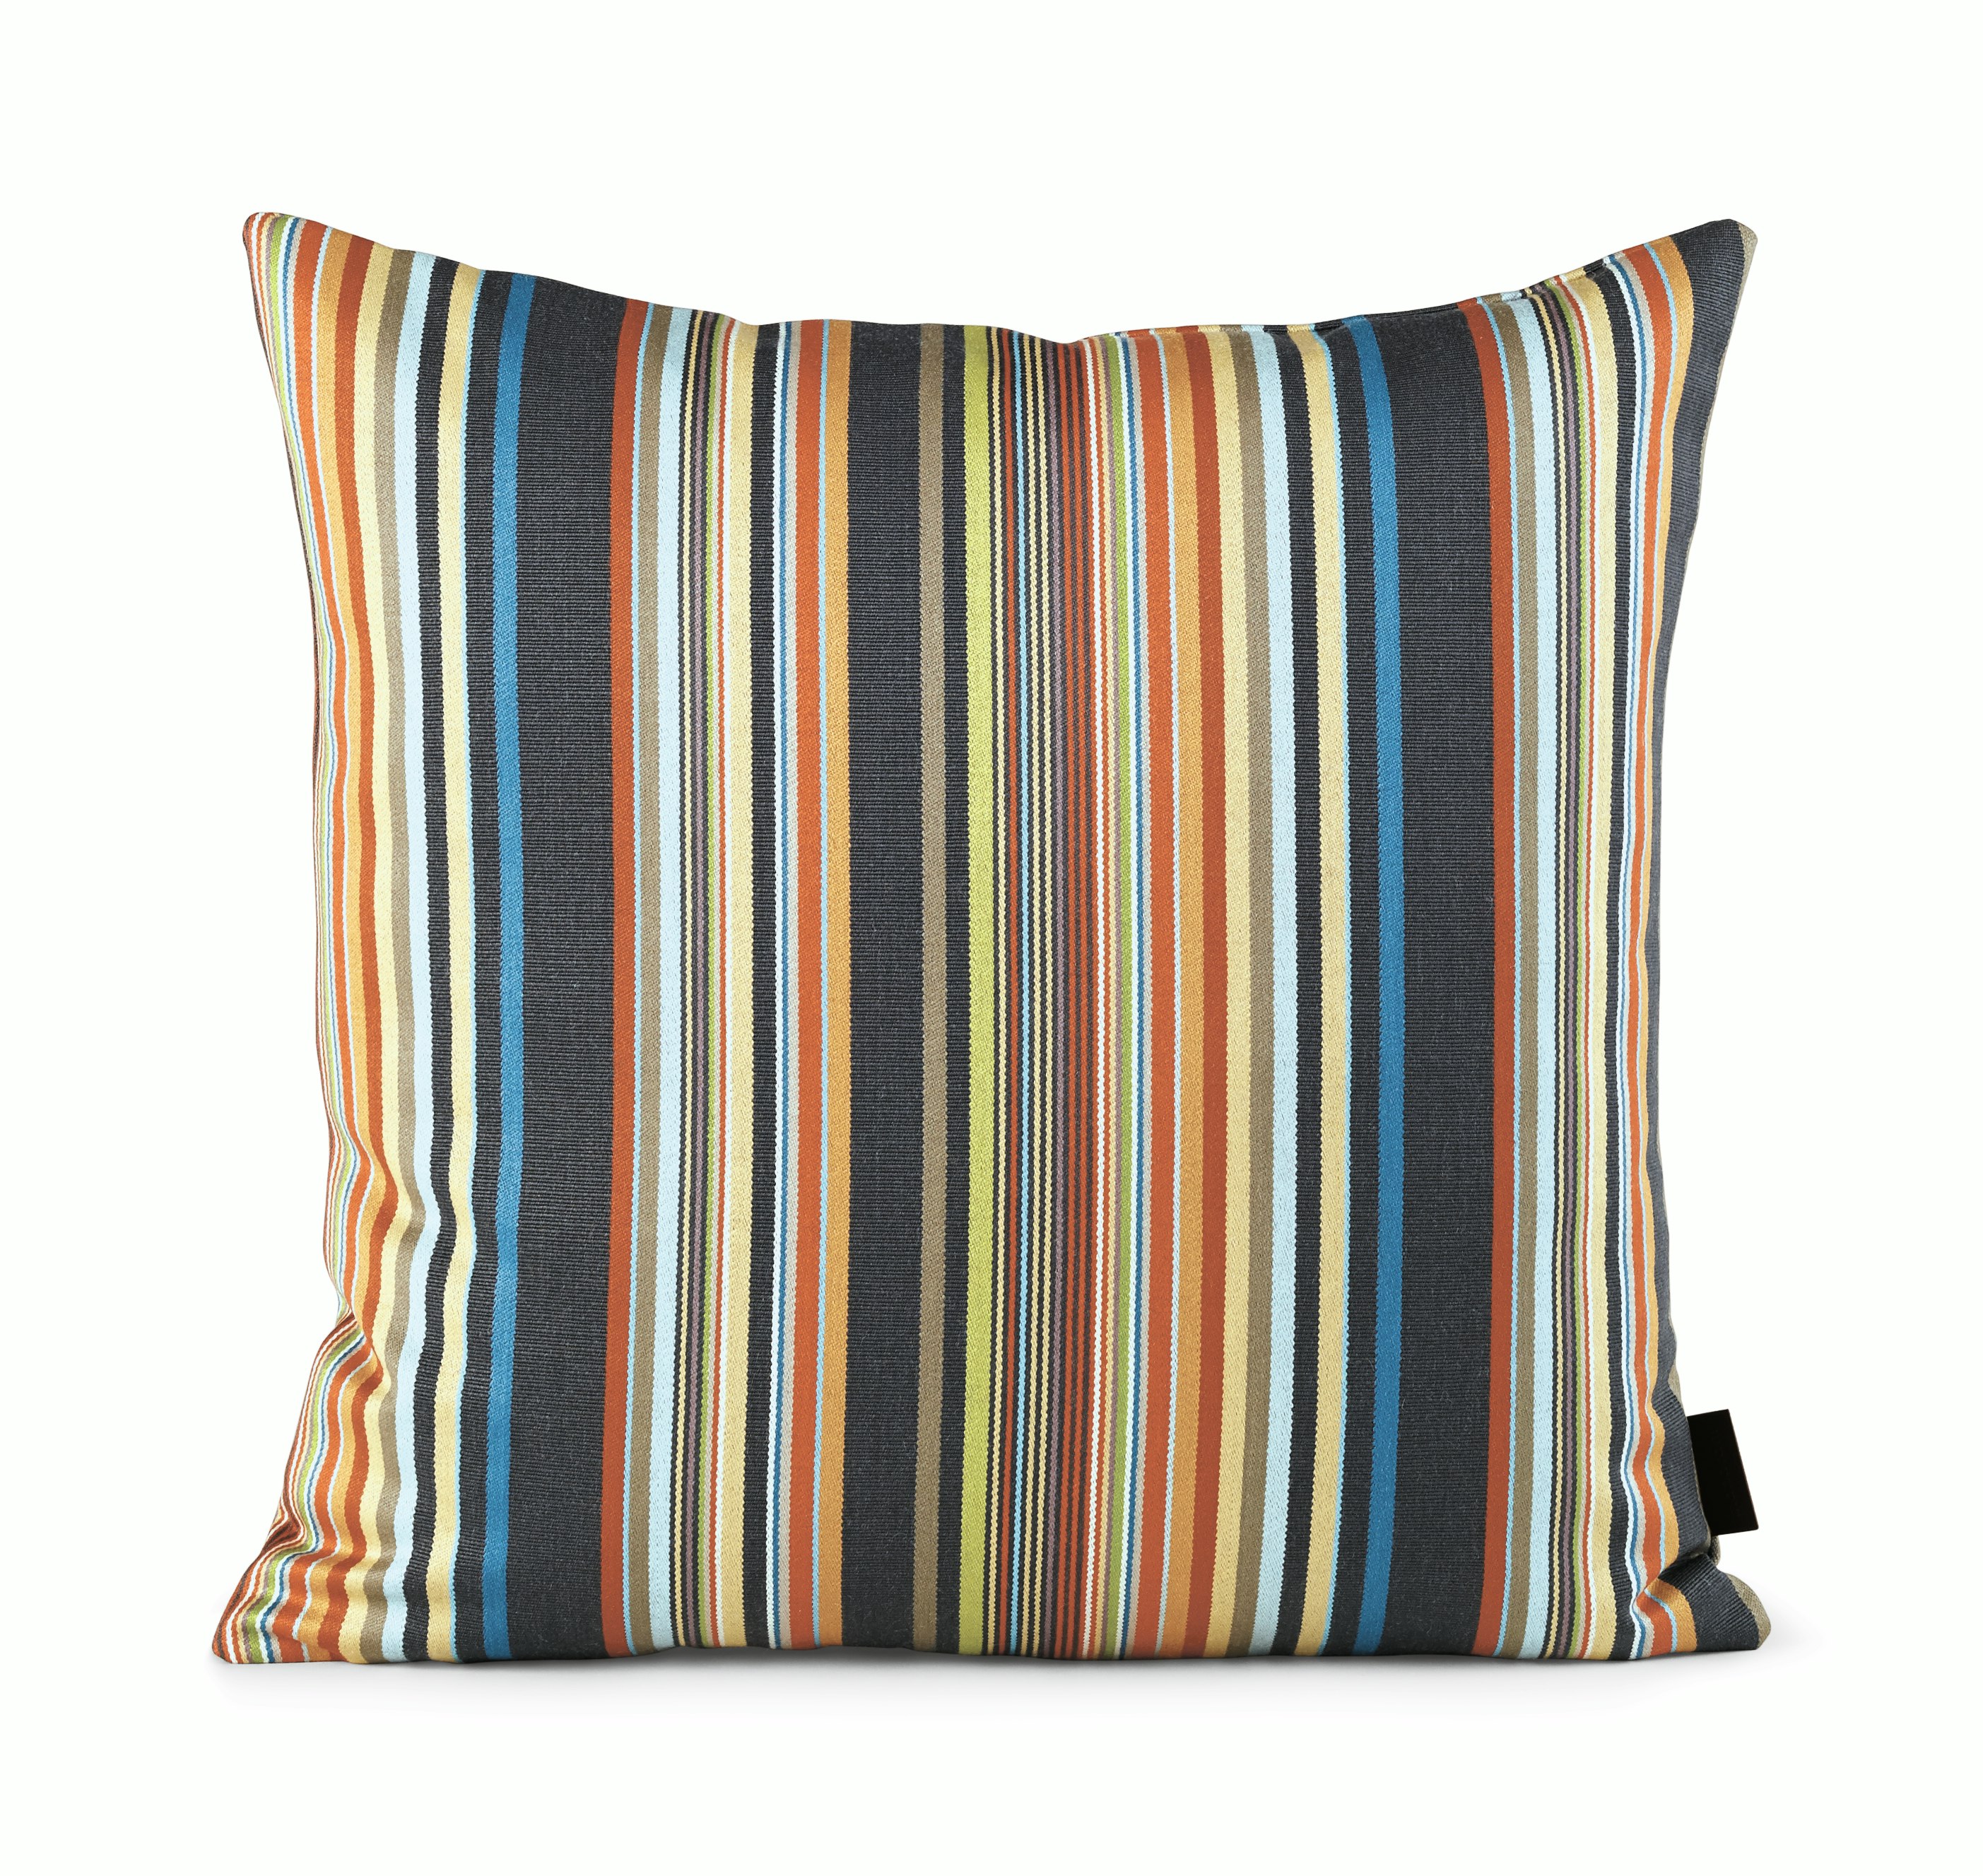 Authentic DWR Exclusive Maharam Pillow in Ottoman Stripe 11 x 21DWR 